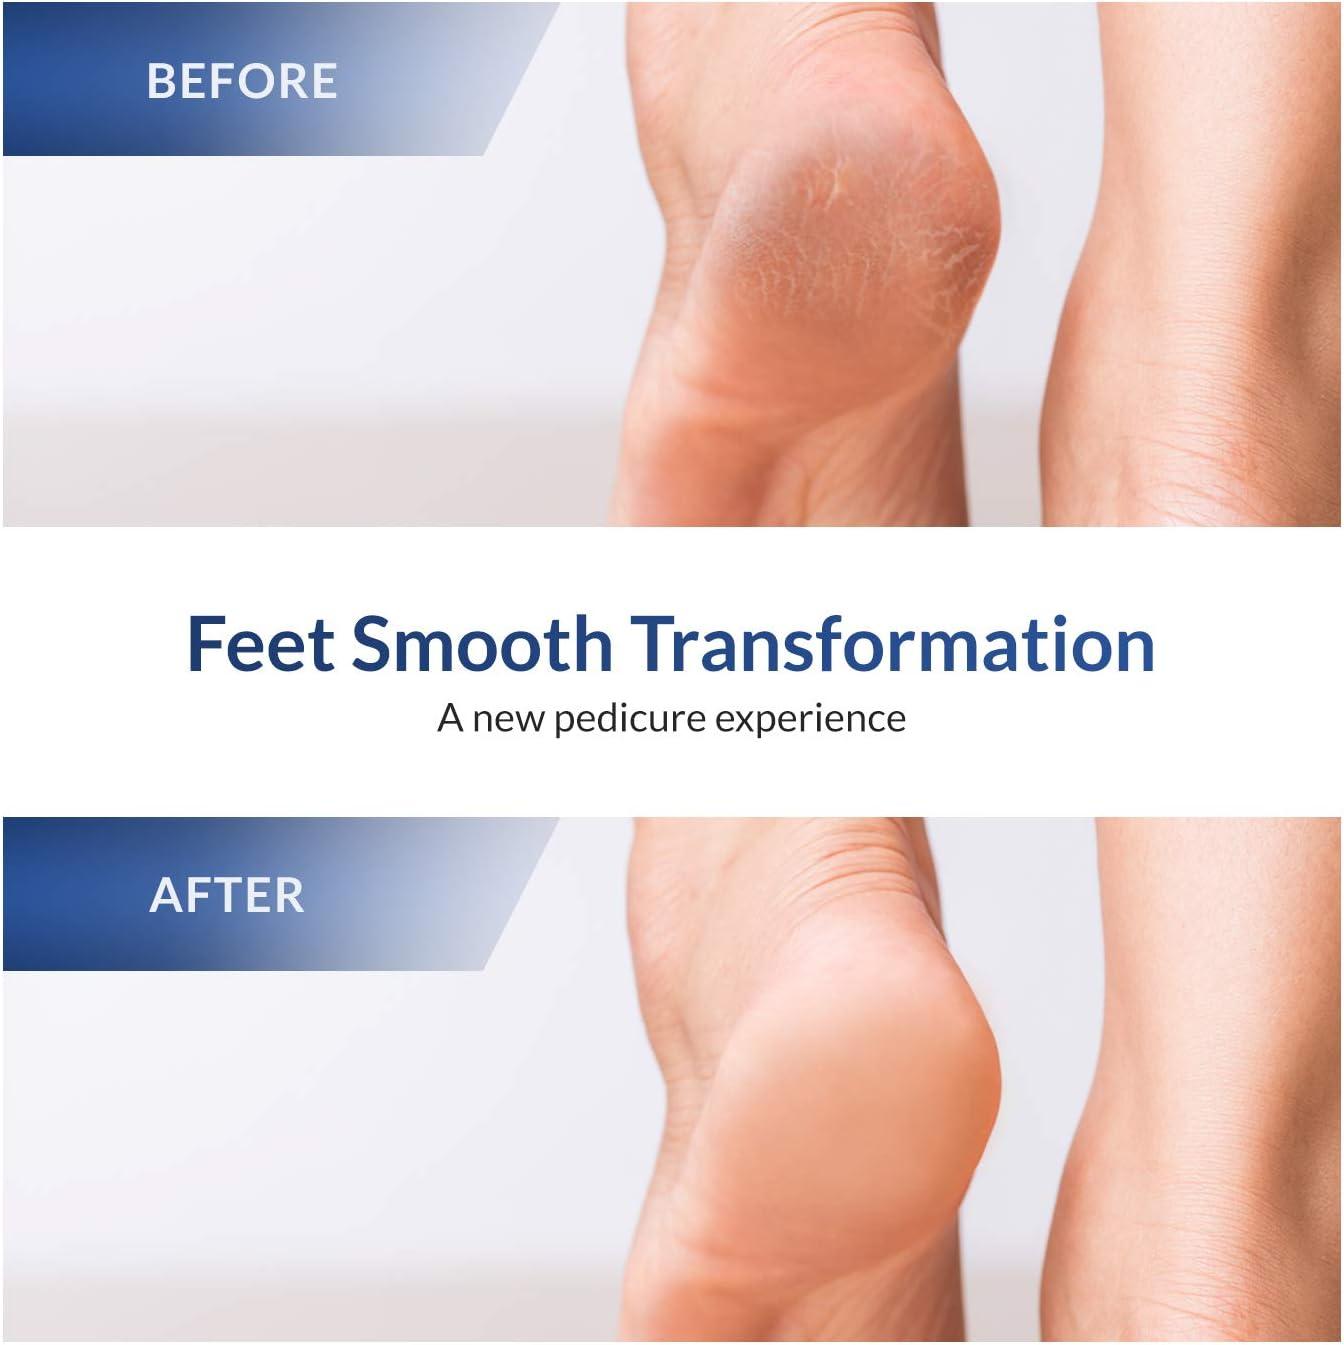 Smooth Feet Tutorial: How To Use The Glamscious 2 In 1 Foot Rasp